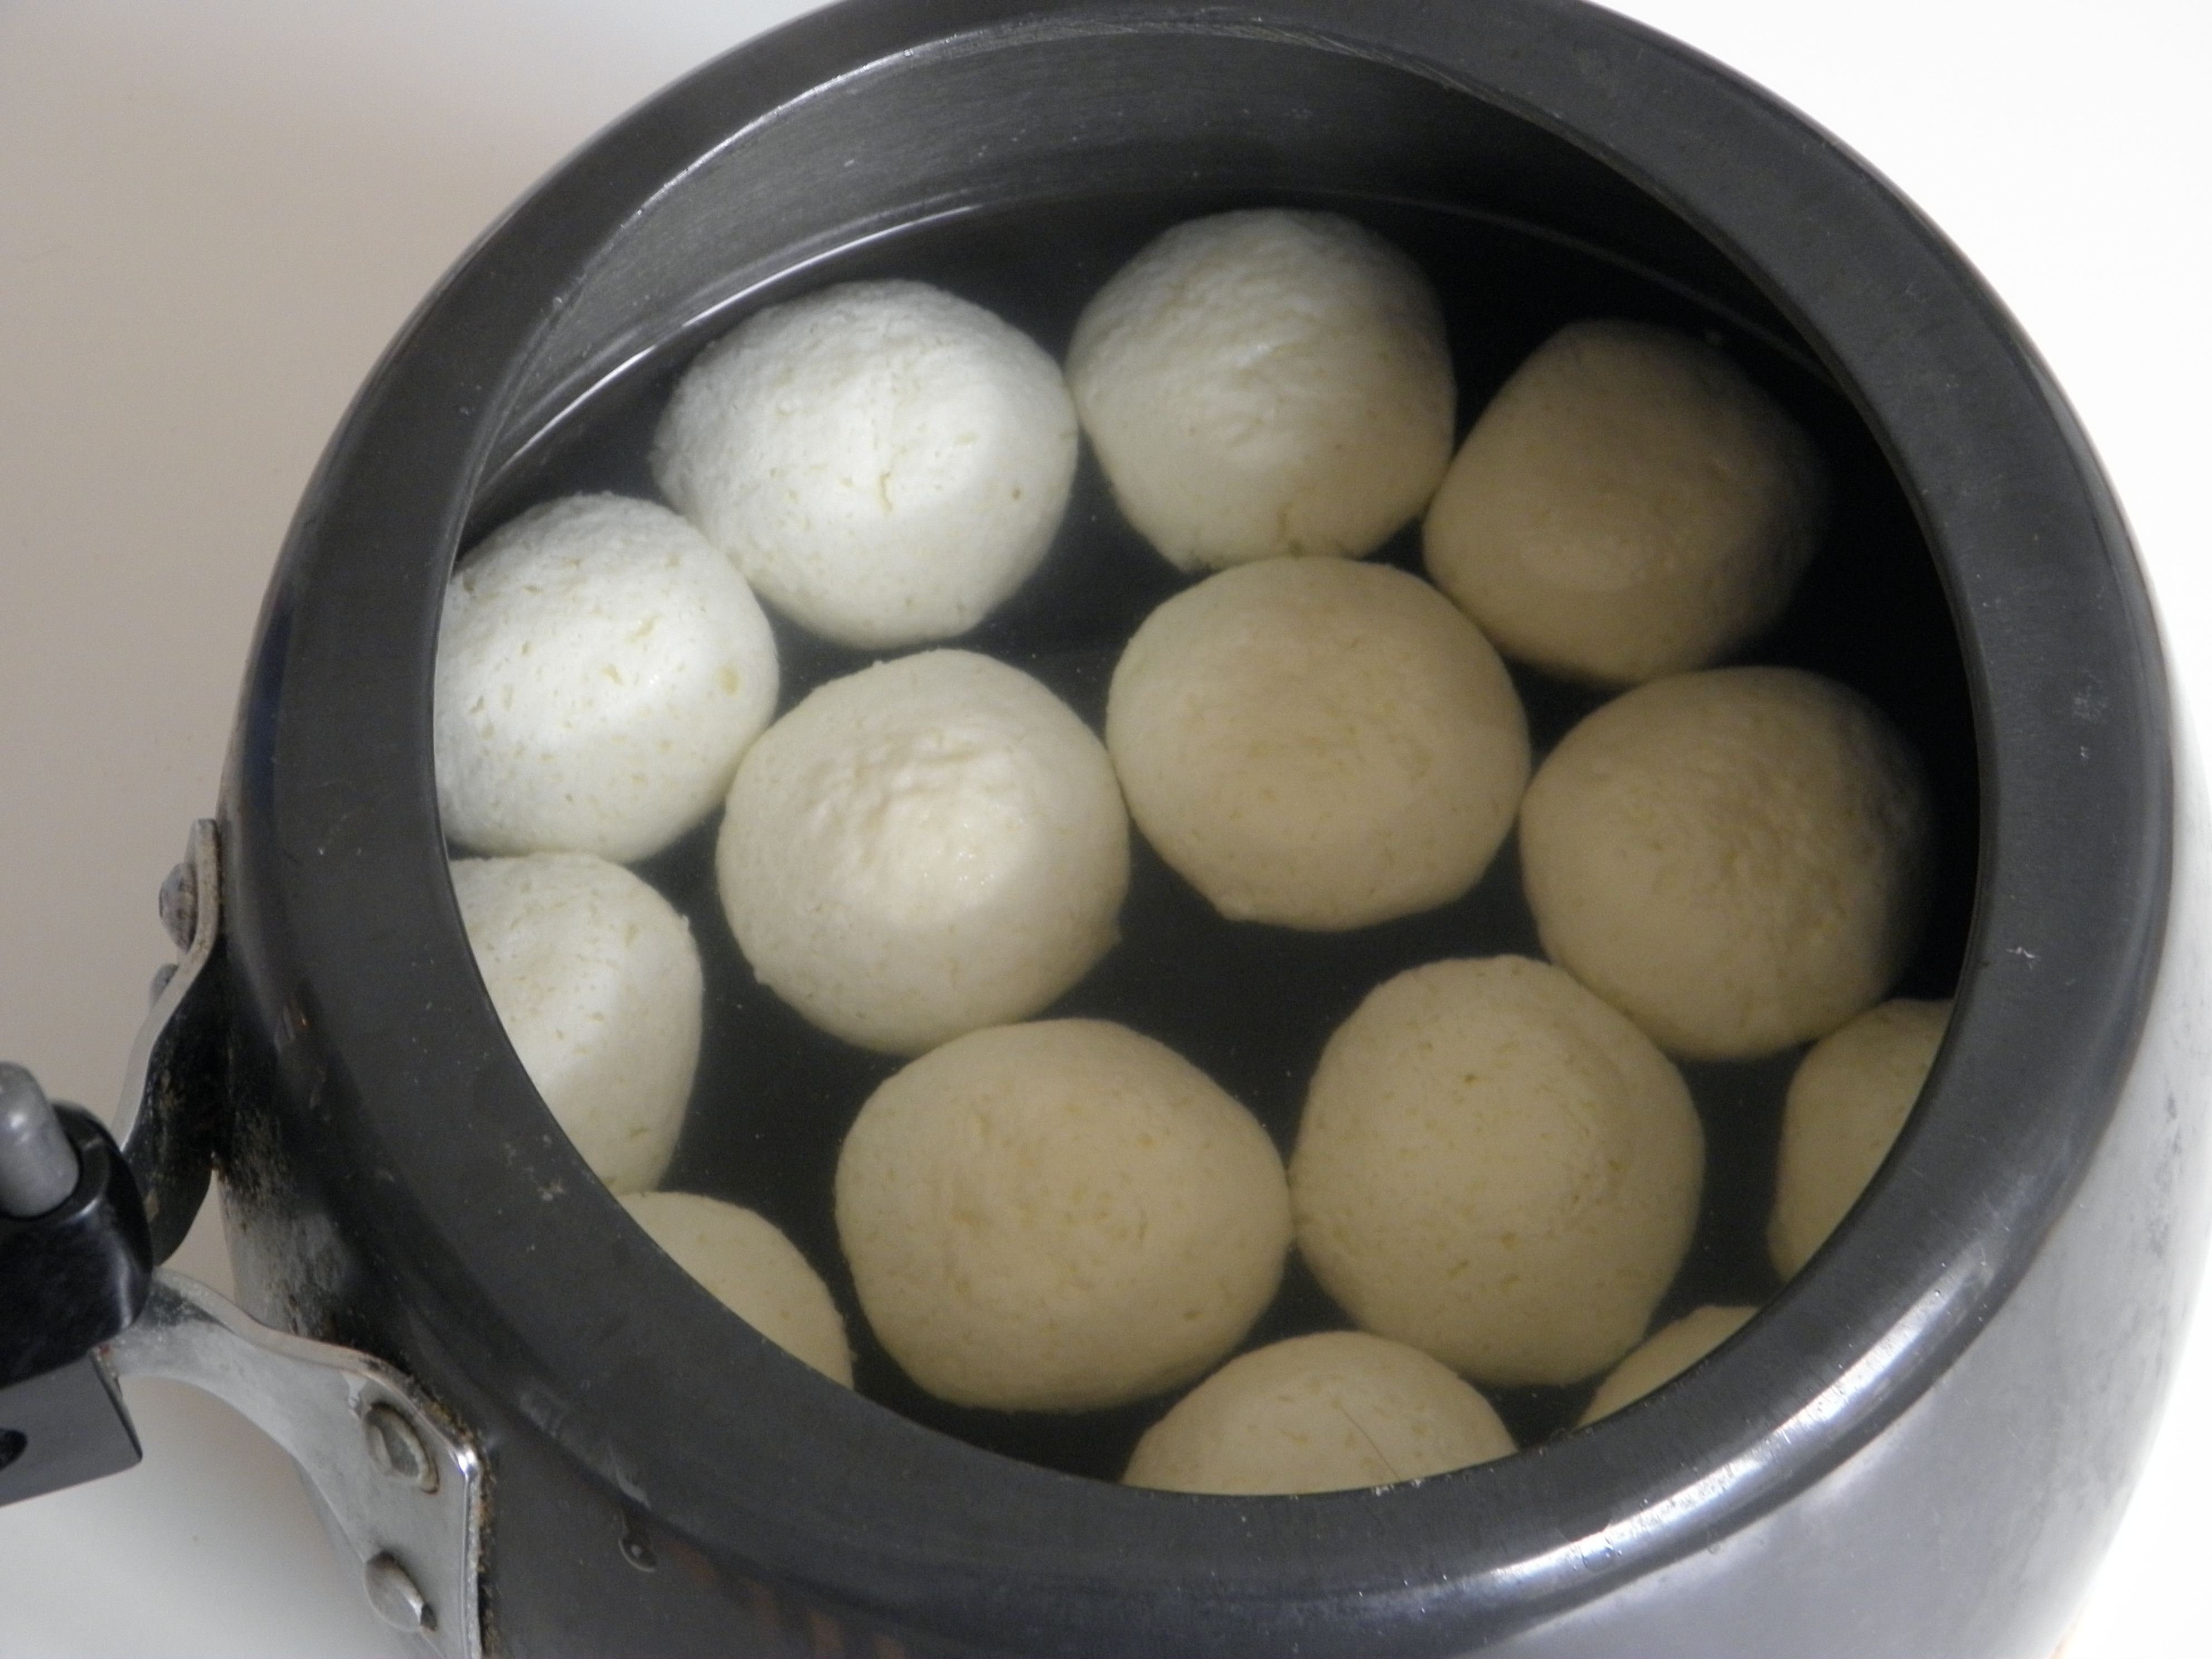 Rasgullas are ready to be served